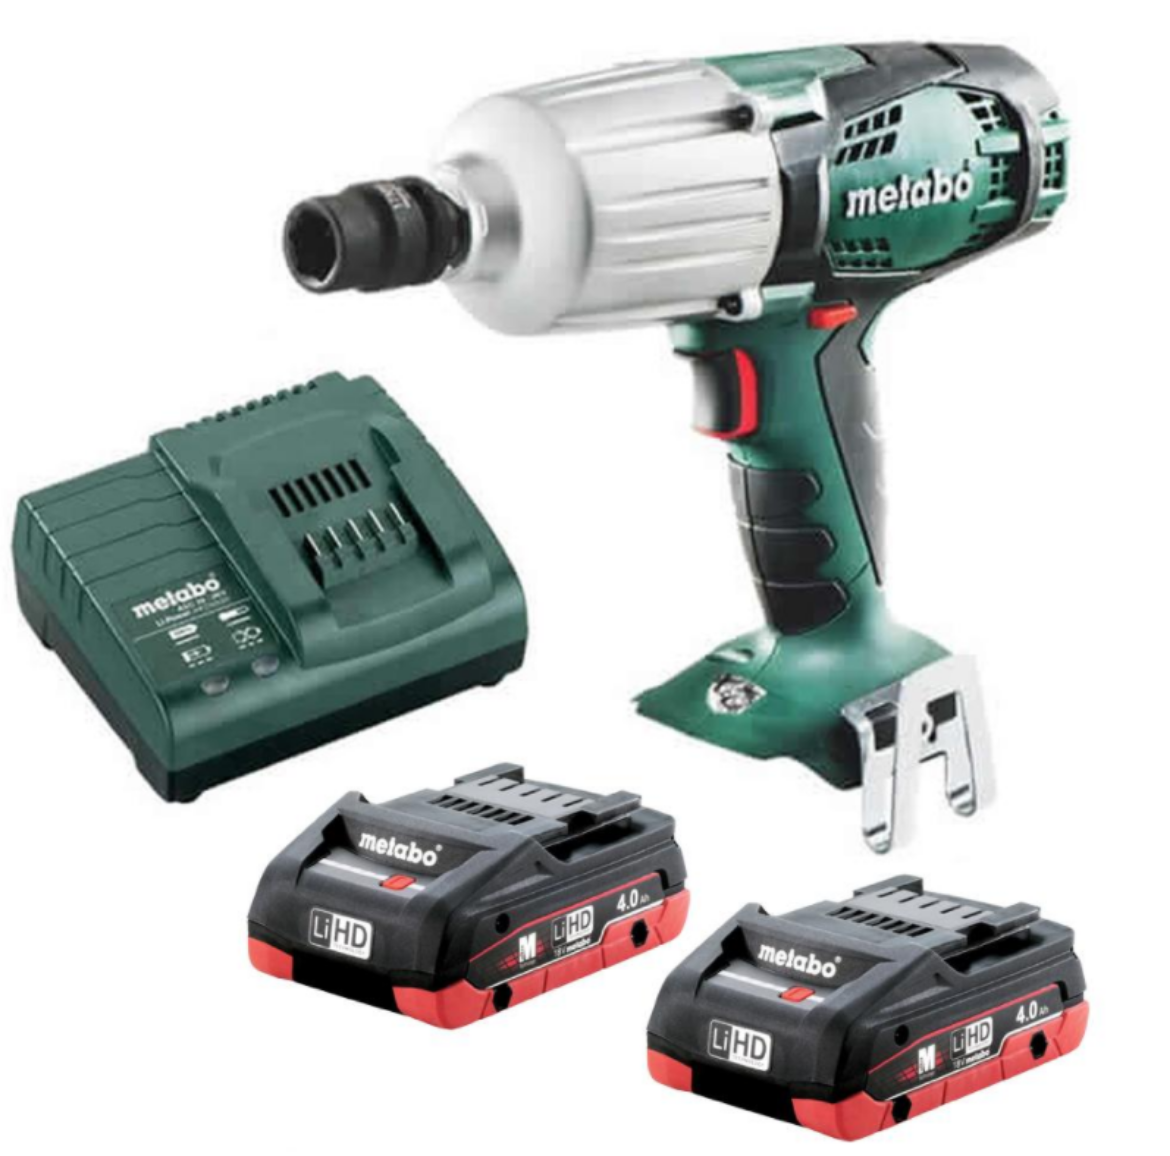 Picture of METABO SSW 18 LTX 600, 1/2" Impact Wrench 600Nm (2 x 4.0 Ah LiHD Battery Packs, ASC 30-36 V Air-cooled Charger, MetaLoc II Case)